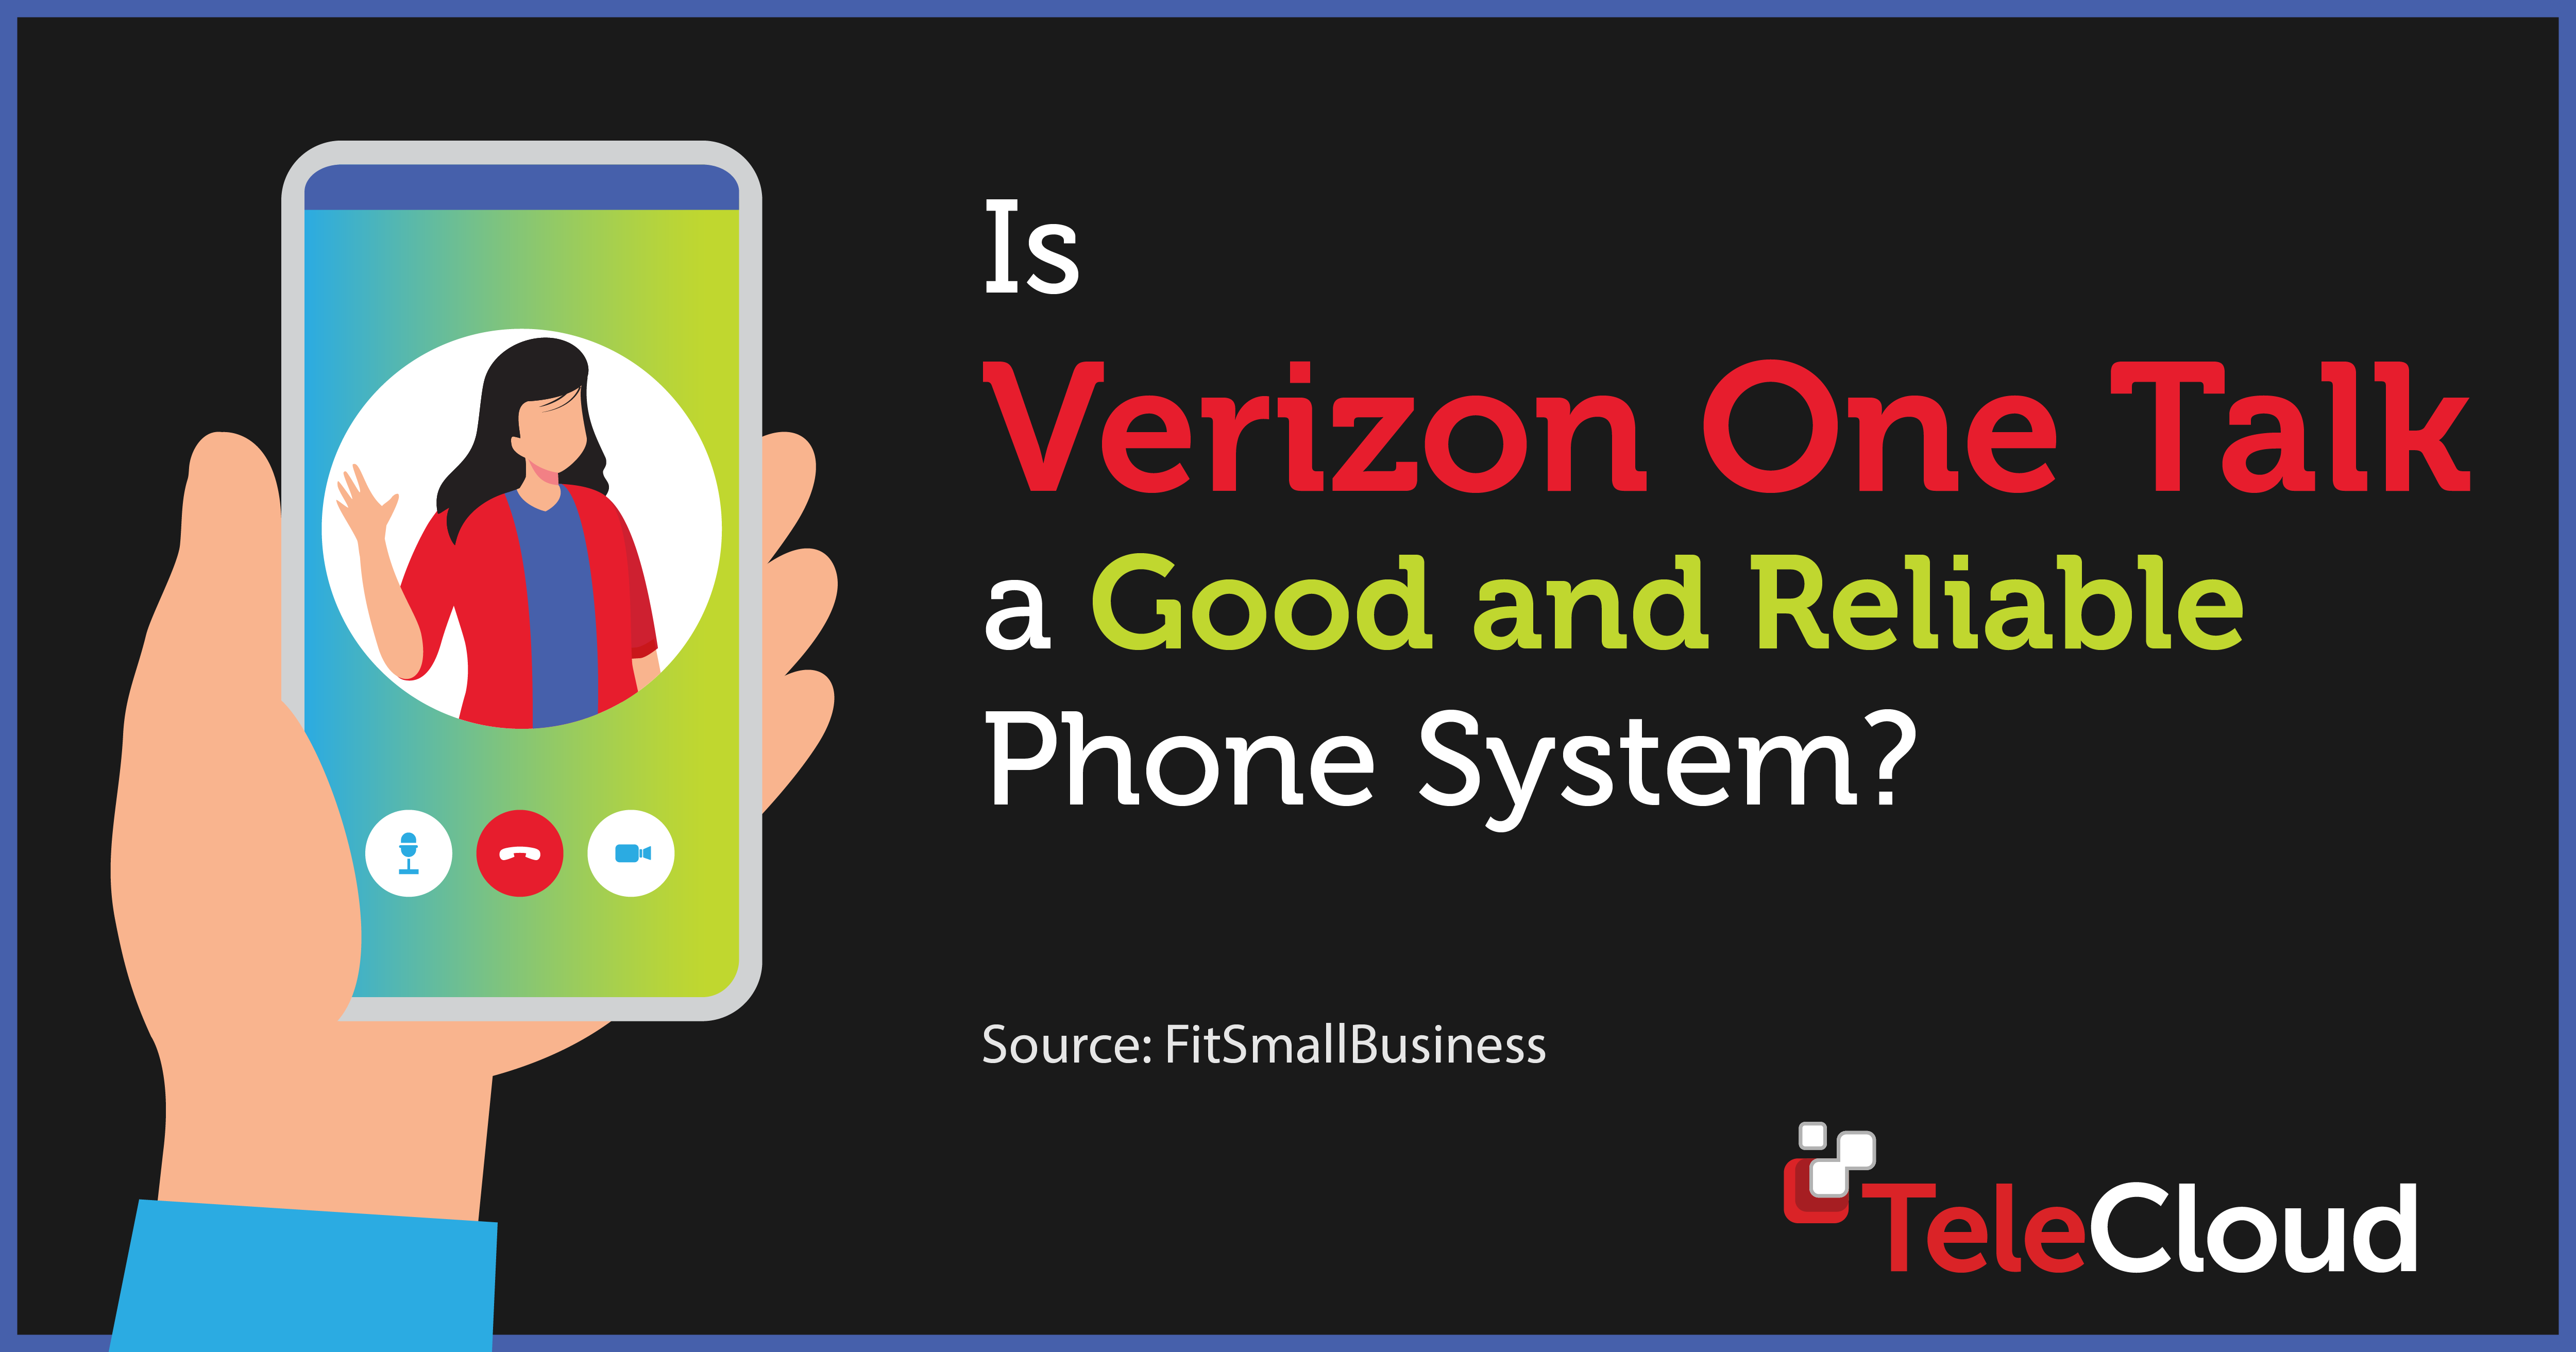 Is Verizon One Talk a Good and Reliable Phone System?